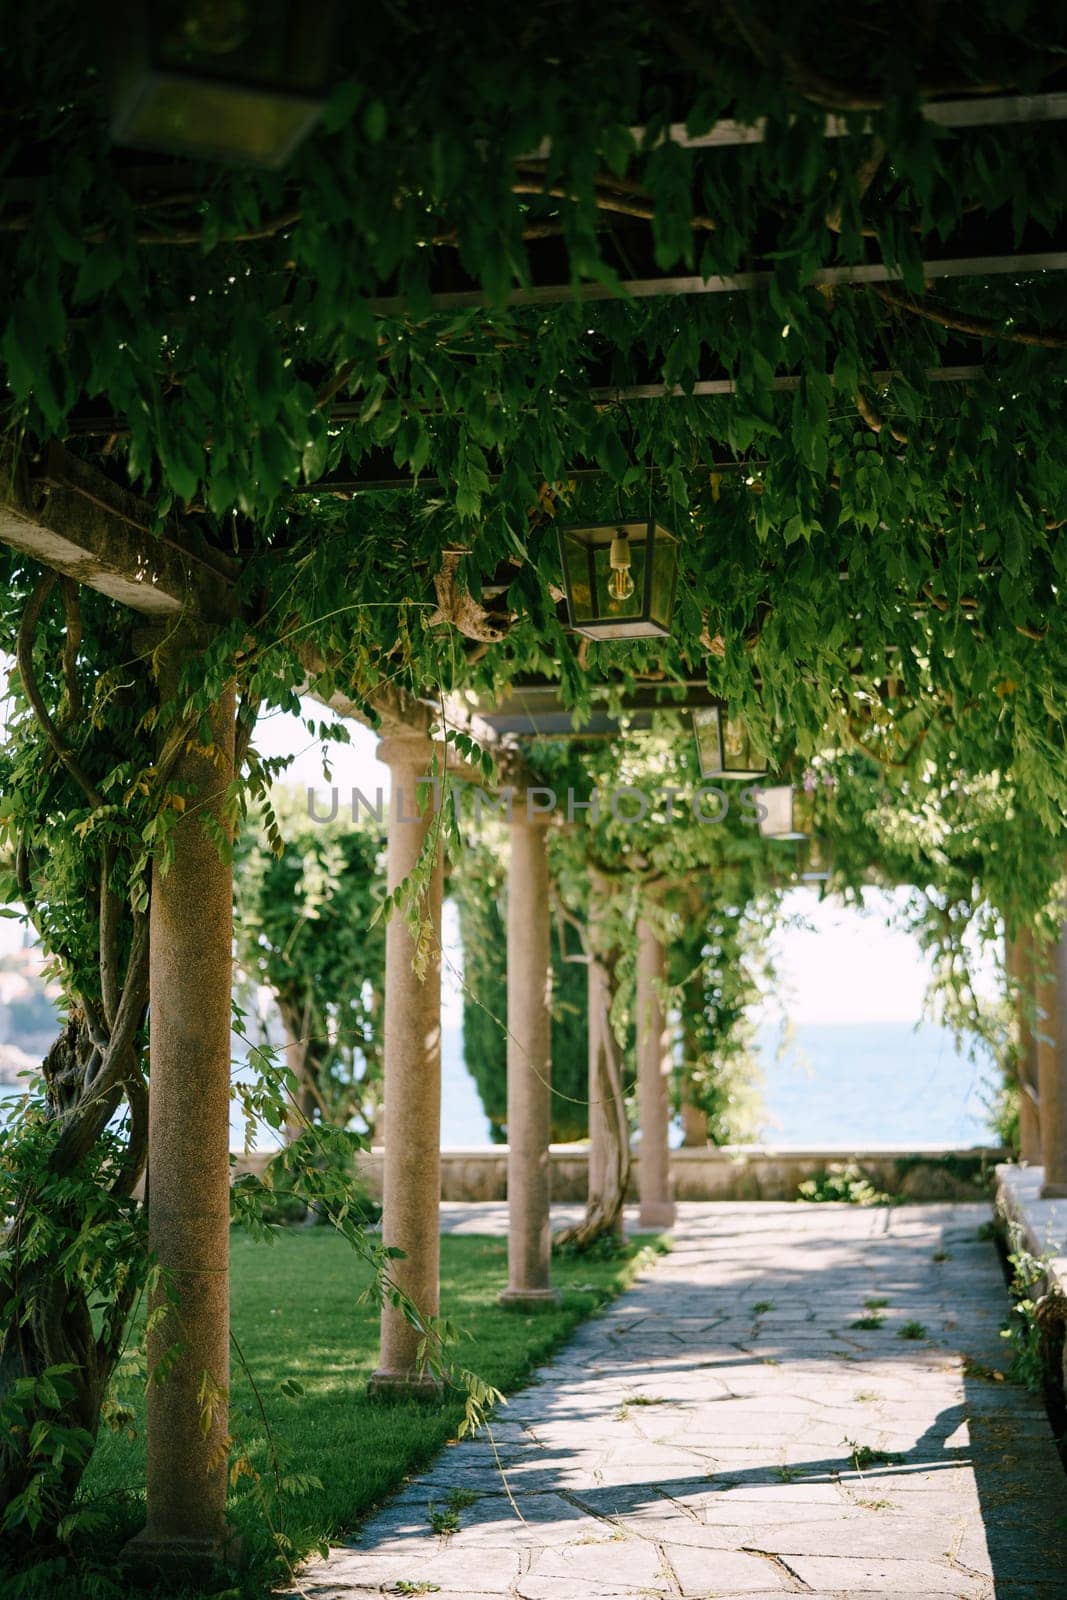 Long pergola with lamps on the beams entwined with greenery overlooks the sea by Nadtochiy